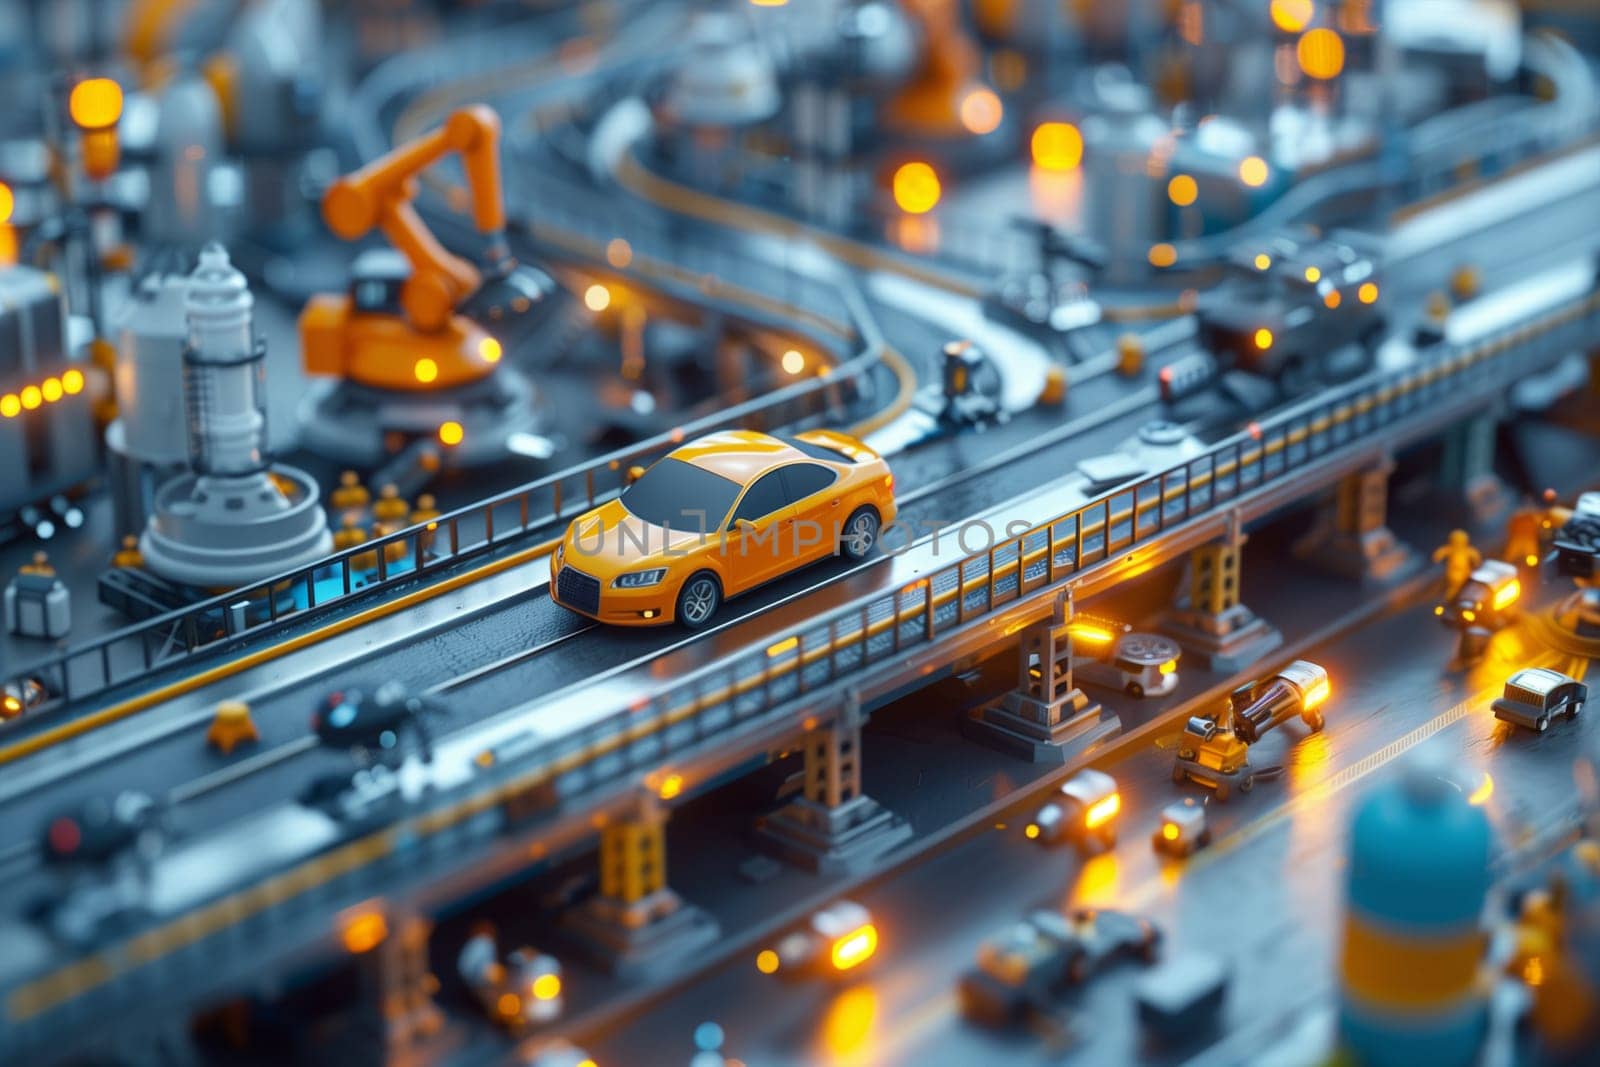 A toy car moves along a conveyor belt in a factory setting, part of an automated production line with robots.